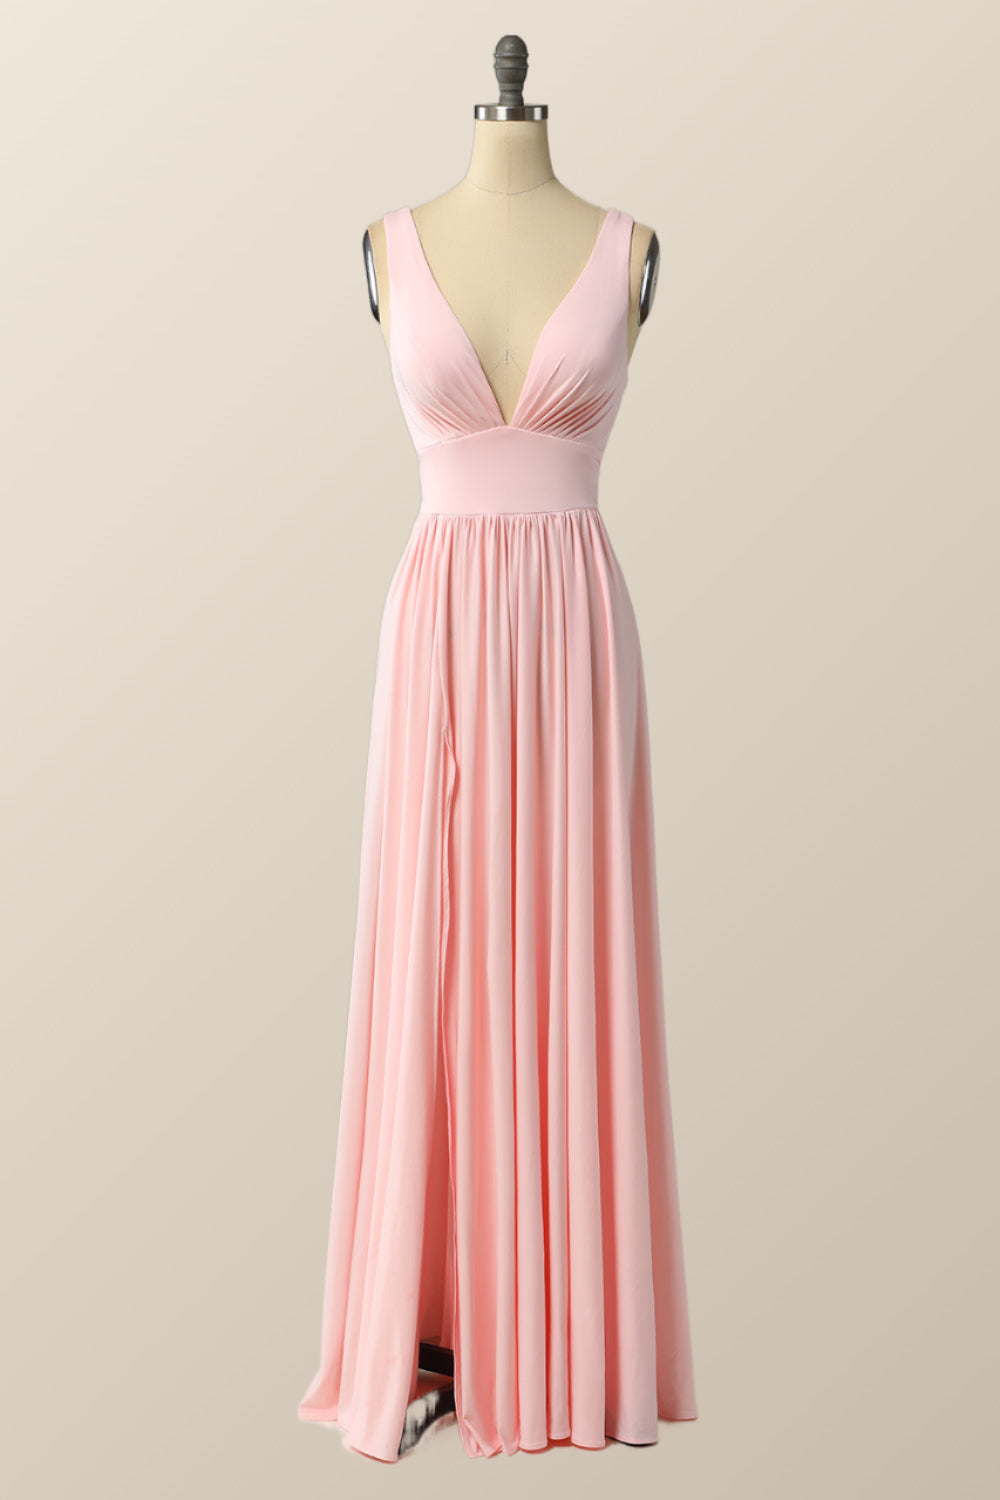 Simply Pink Empire A-line Maxi Dress with Slit